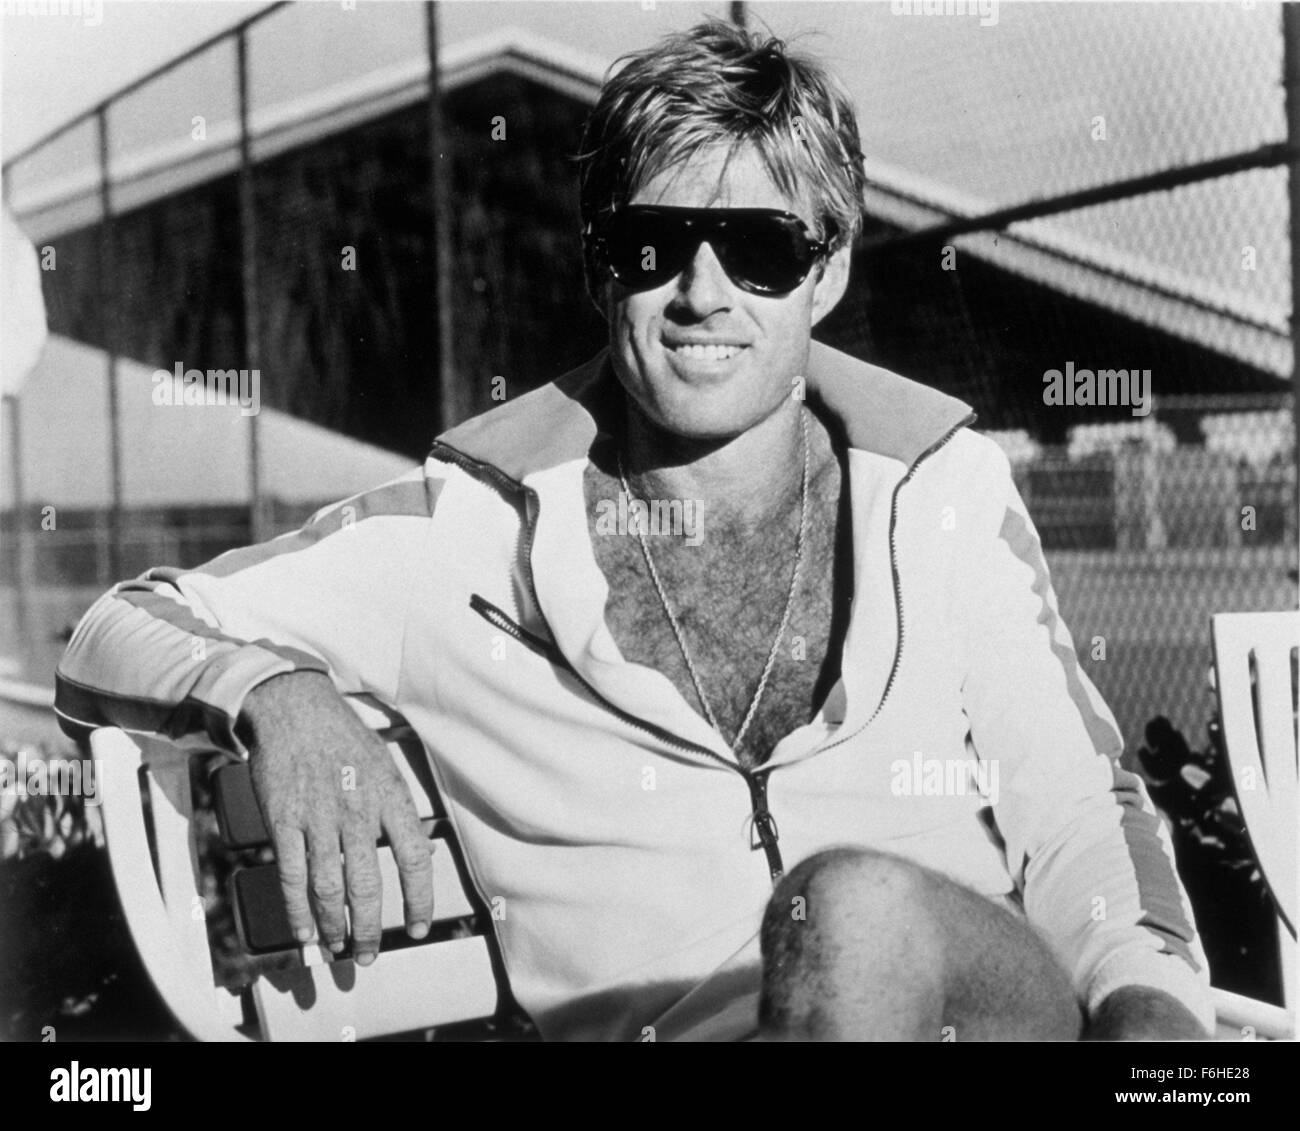 1973, Film Title: WAY WE WERE, Director: SYDNEY POLLACK, Studio: COLUMBIA, Pictured: ACCESSORIES, SYDNEY POLLACK, ROBERT REDFORD, SUNGLASSES. (Credit Image: SNAP) Stock Photo